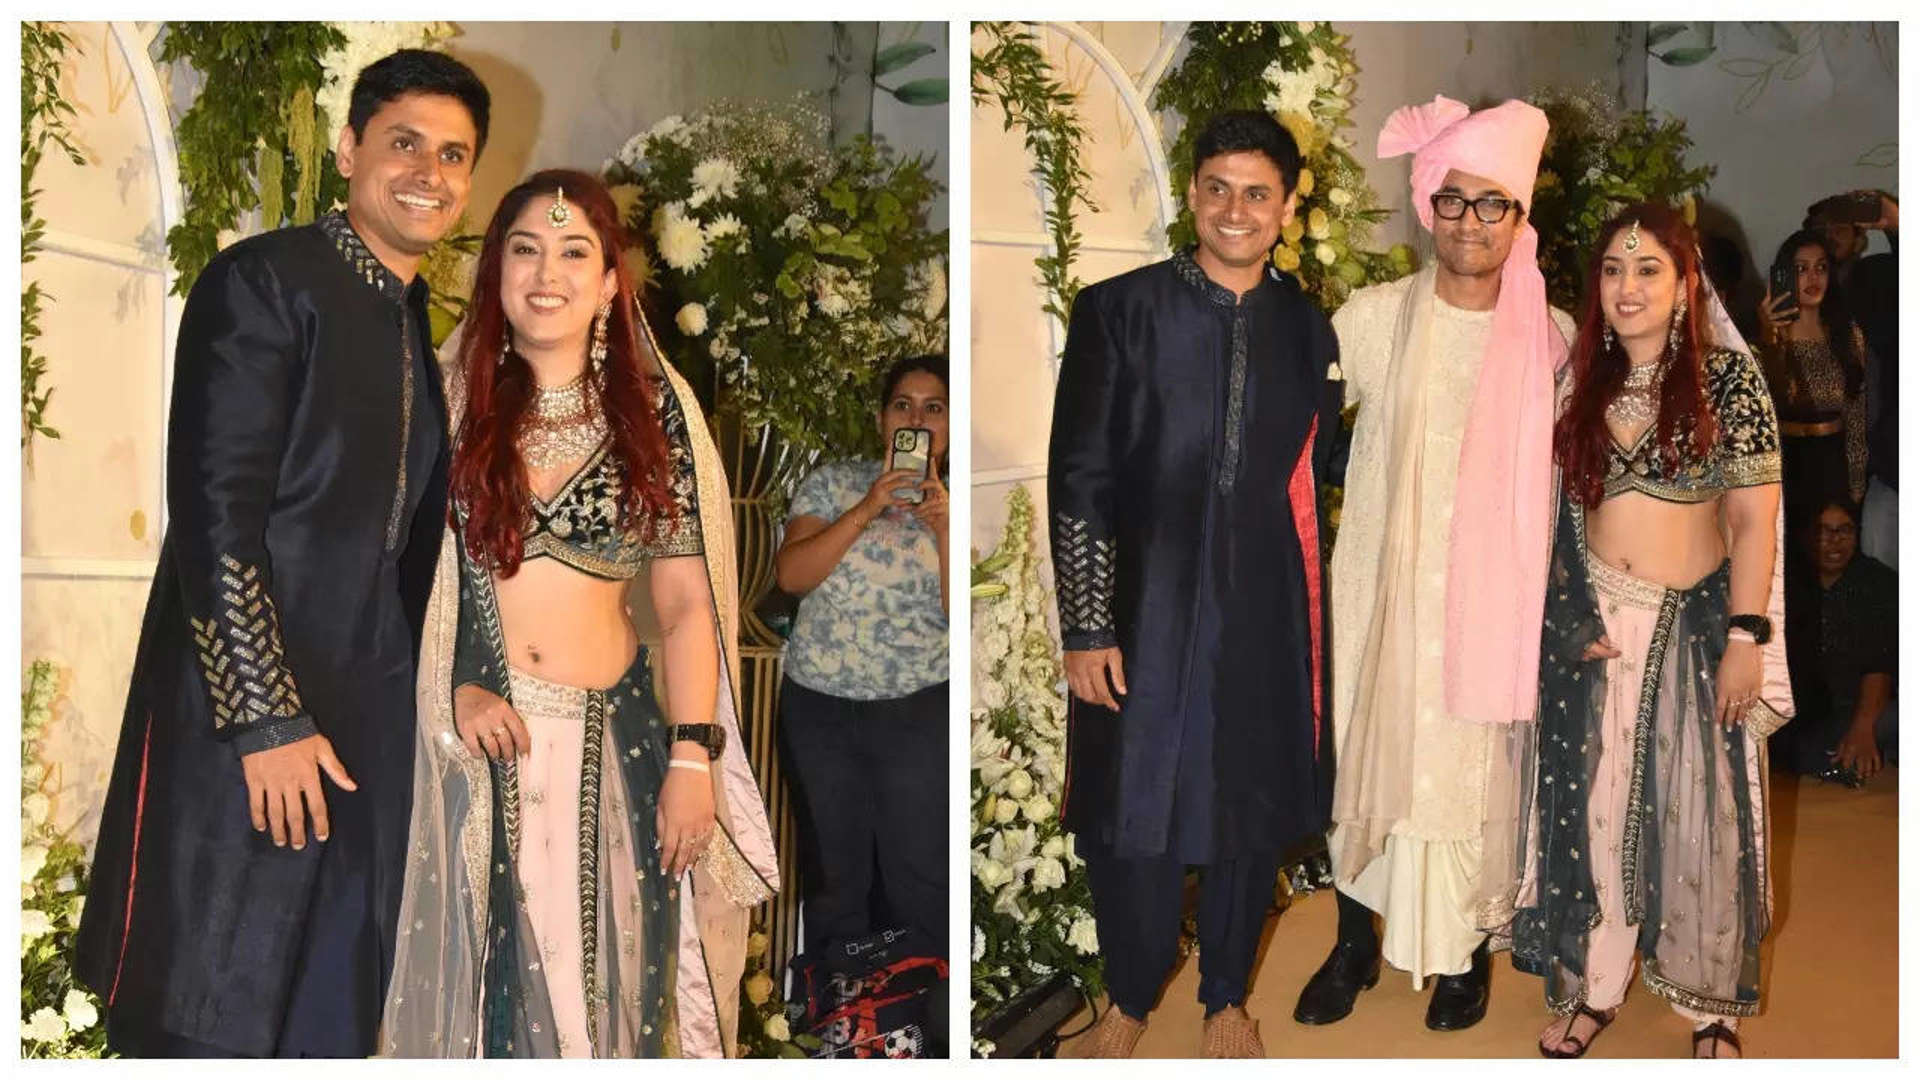 Aamir Khan’s daughter Ira Khan and Nupur Shikhare have tied the knot and we’ve got all the live updates for you.